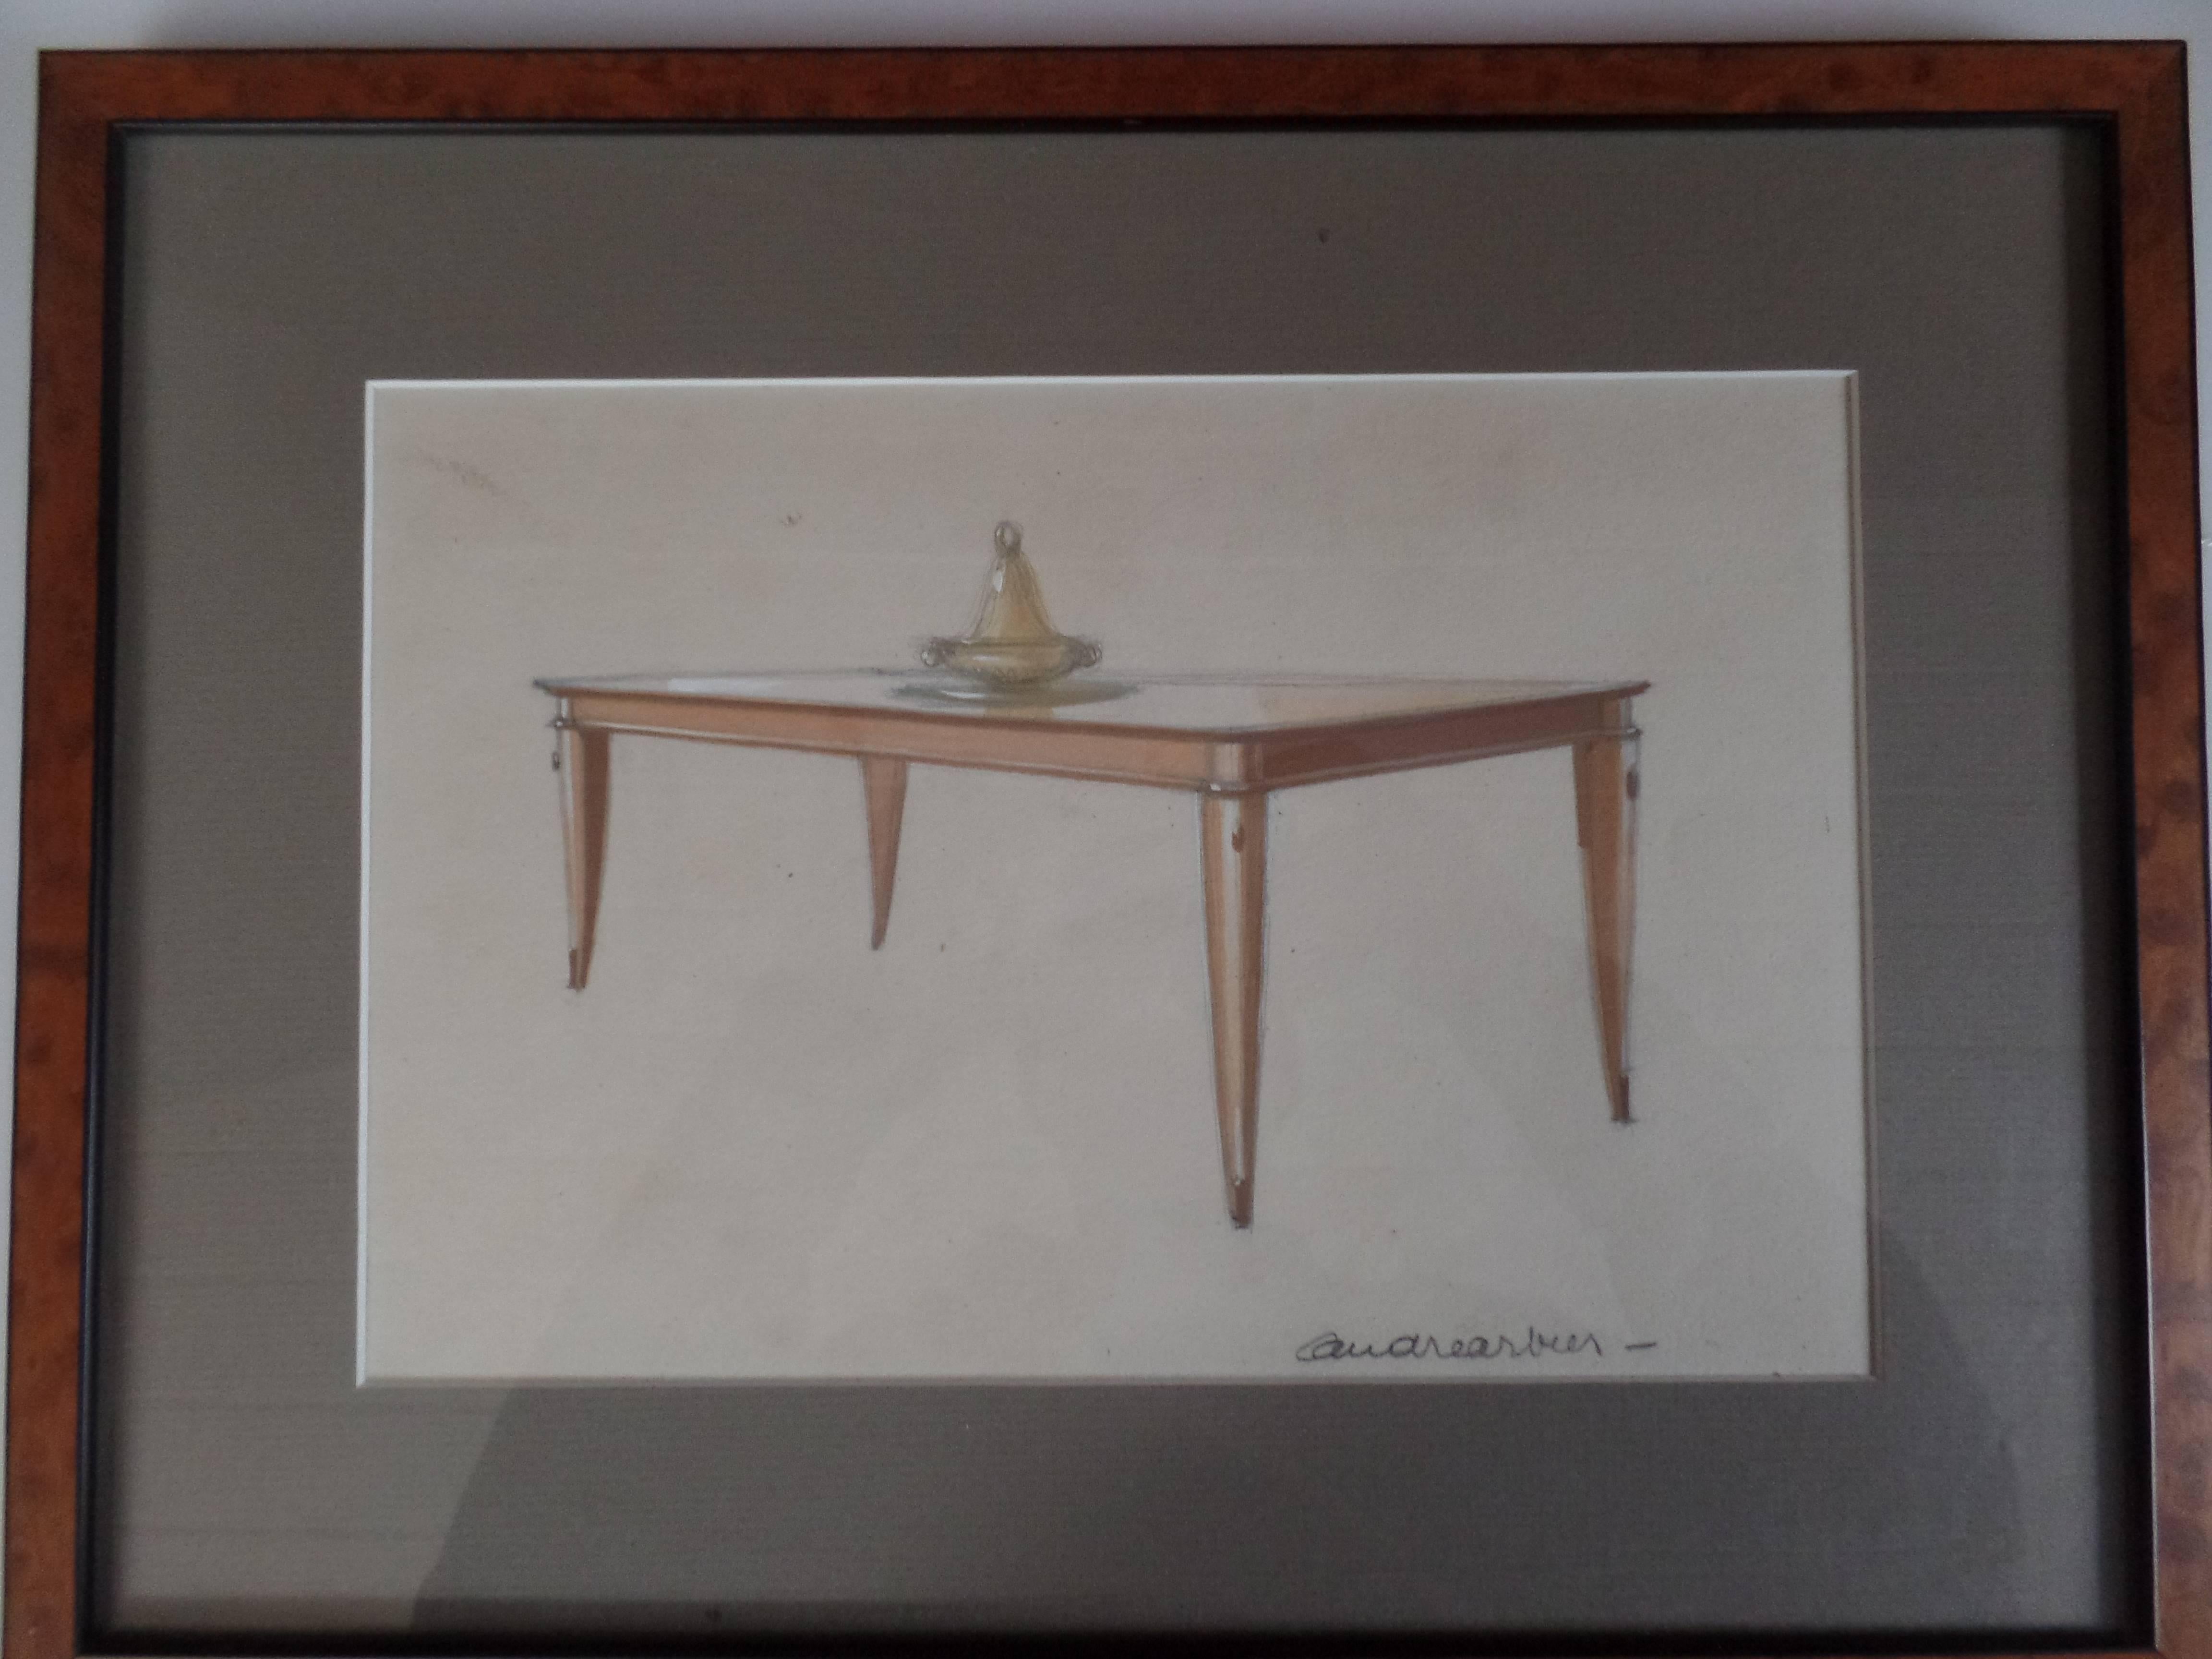 Gouache and pen work by André Arbus (1903-1969). Signed Andre Arbus. 

Origin: Drawing of dining table by Andre Arbus for the apartment of Mme Pedersen, Paris, 1938.

Literature: Andre Arbus, Yvonne Brunhammer, Flammarion, Paris, 1997.